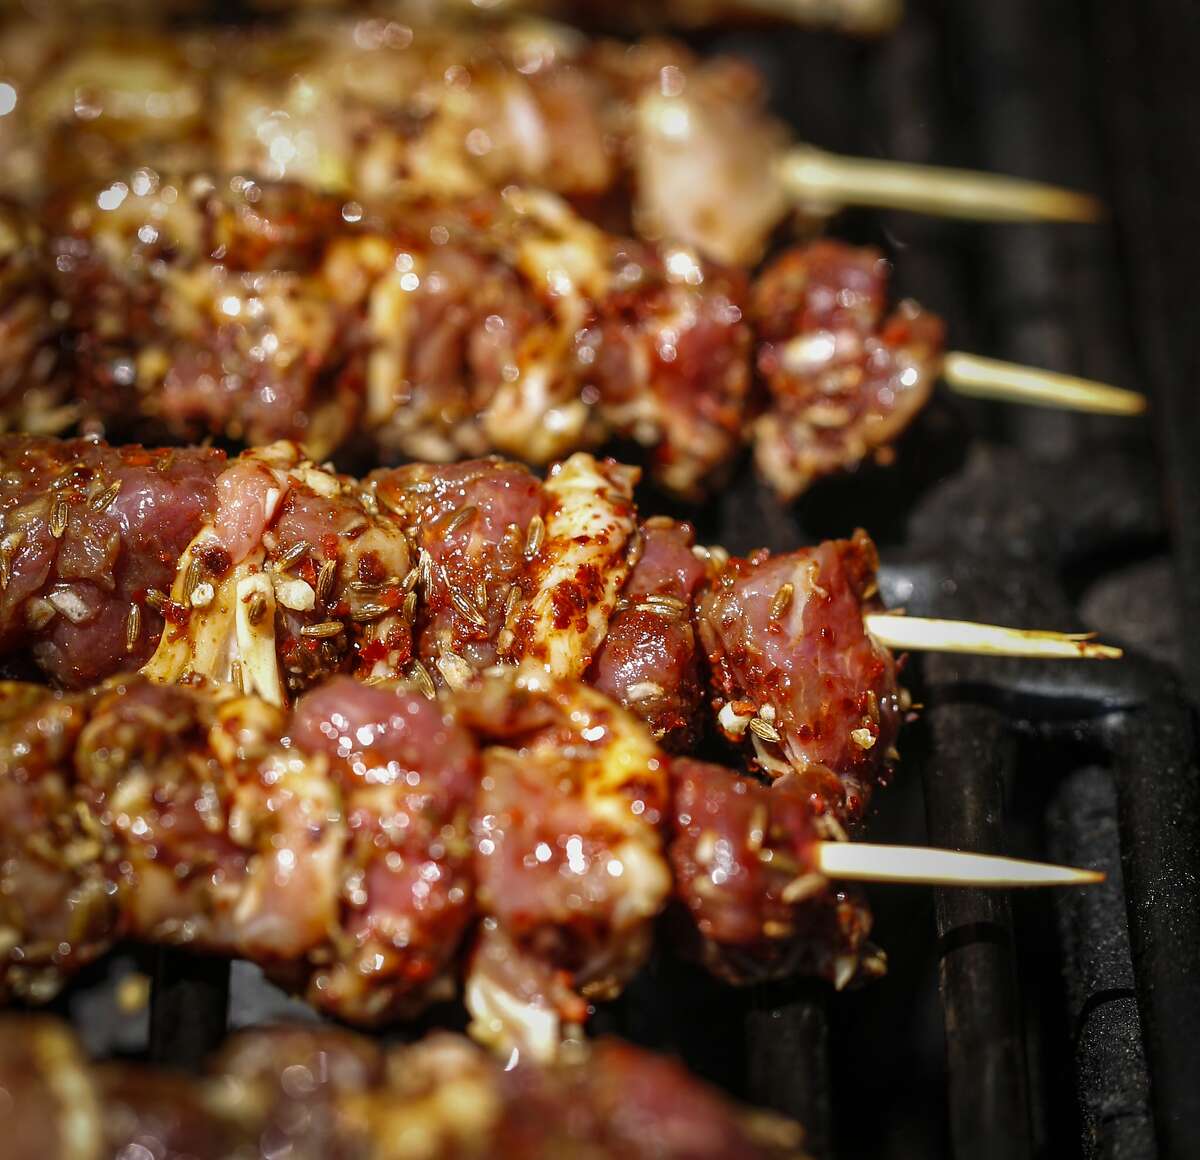 Chicken and lamb skewers dusted with chiles, cumin and garlic are seen on Thursday, Aug. 27, 2015 in San Francisco, Calif.